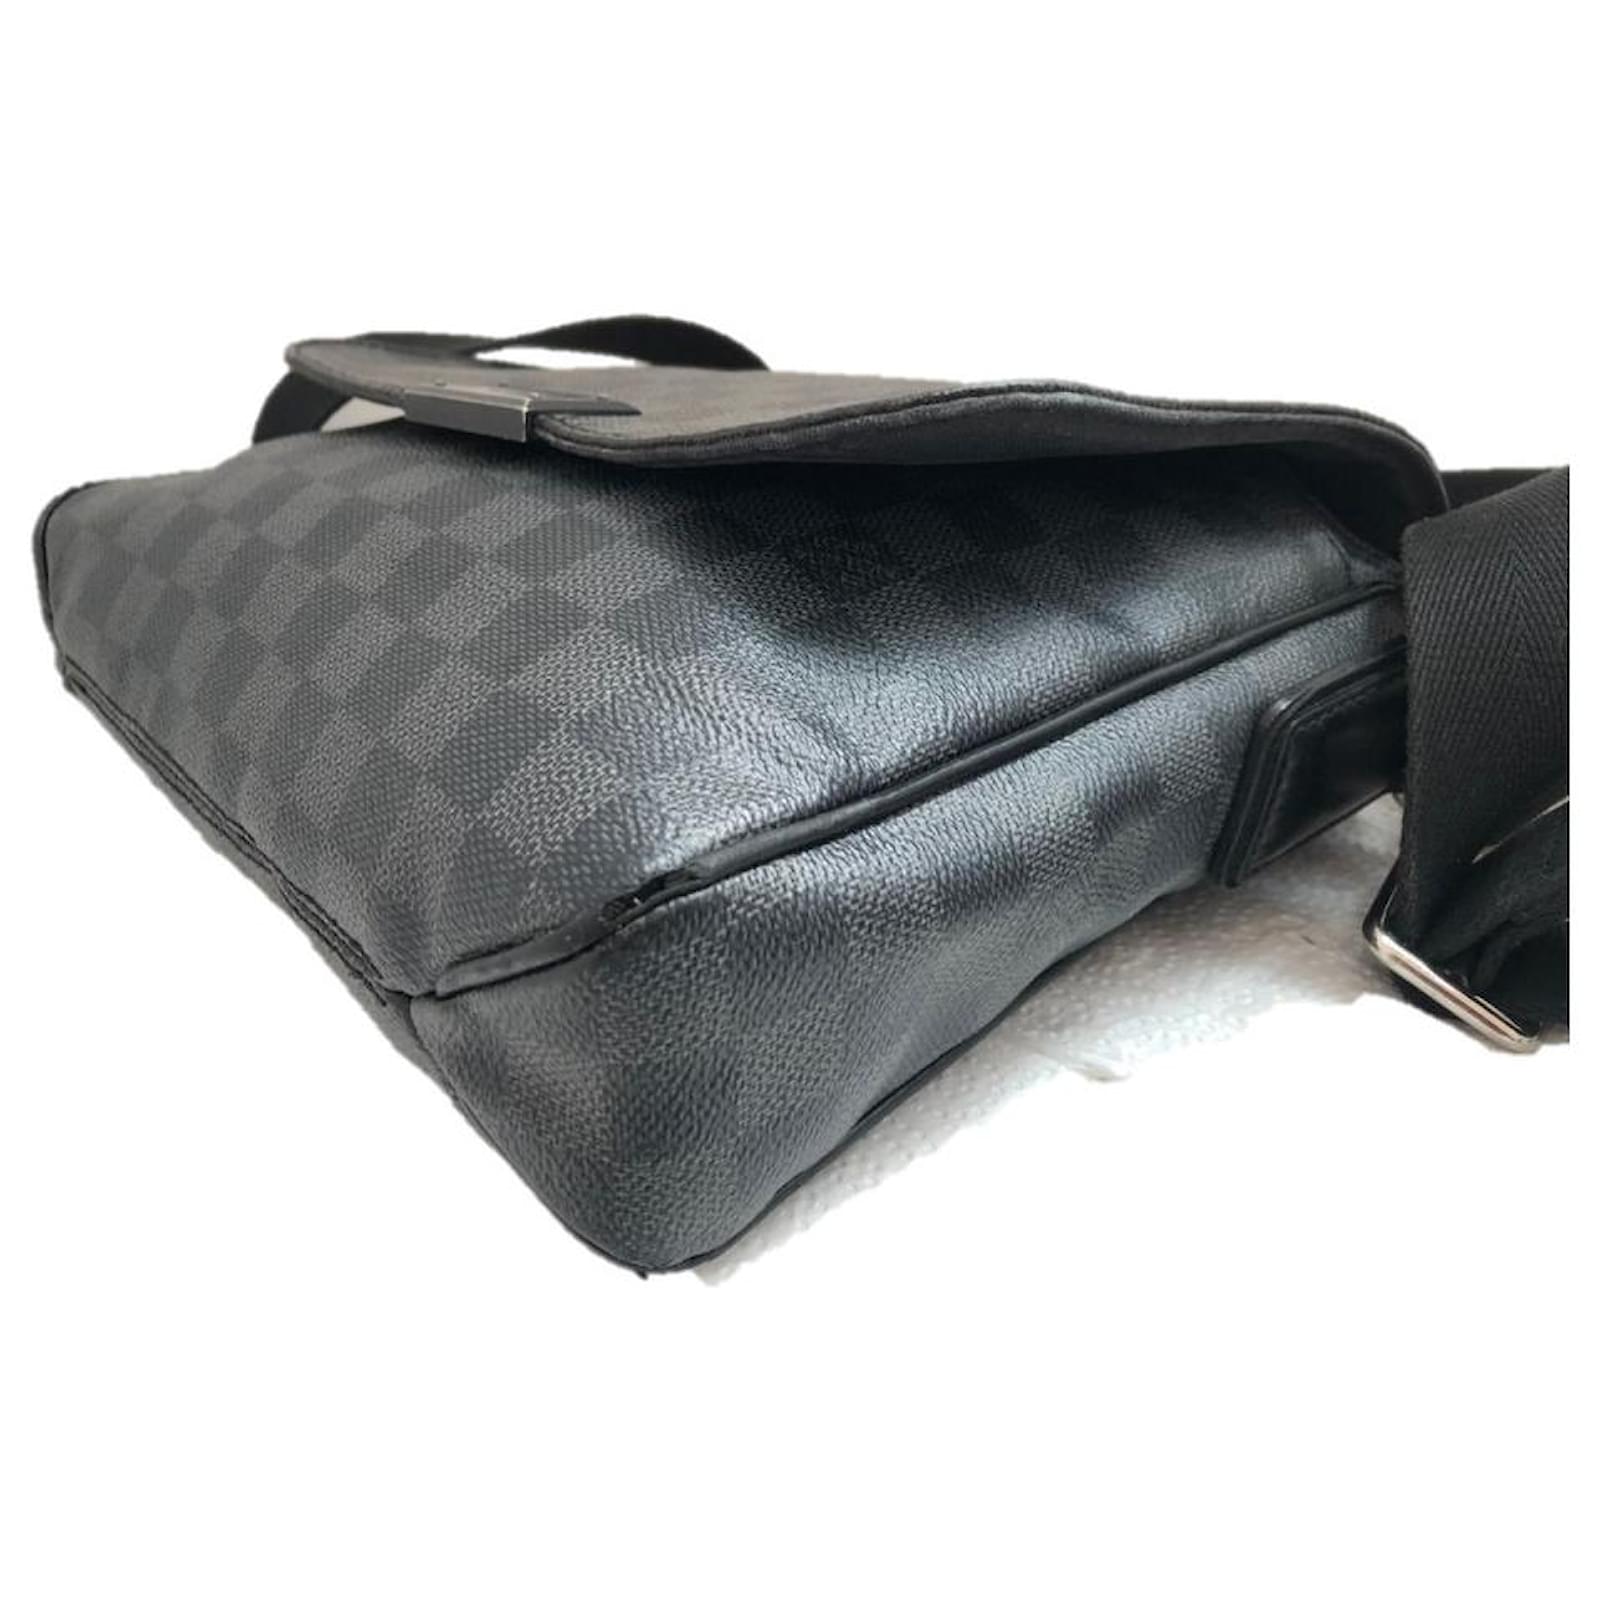 District leather bag Louis Vuitton Black in Leather - 35172301